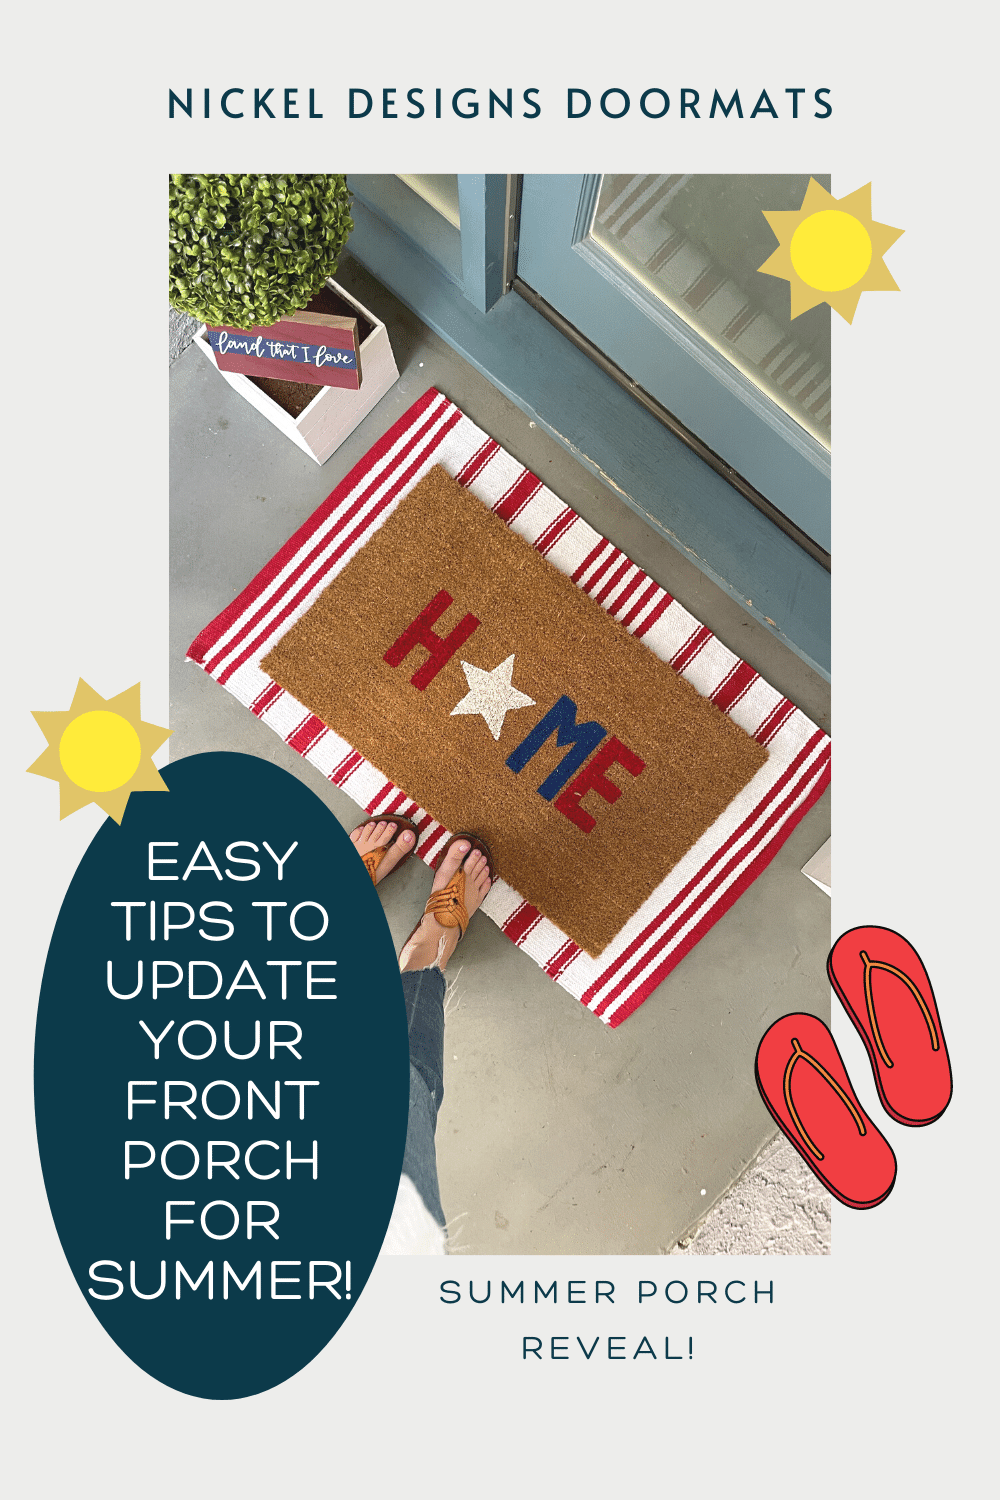 How to Create a Summer Porch for Your Home